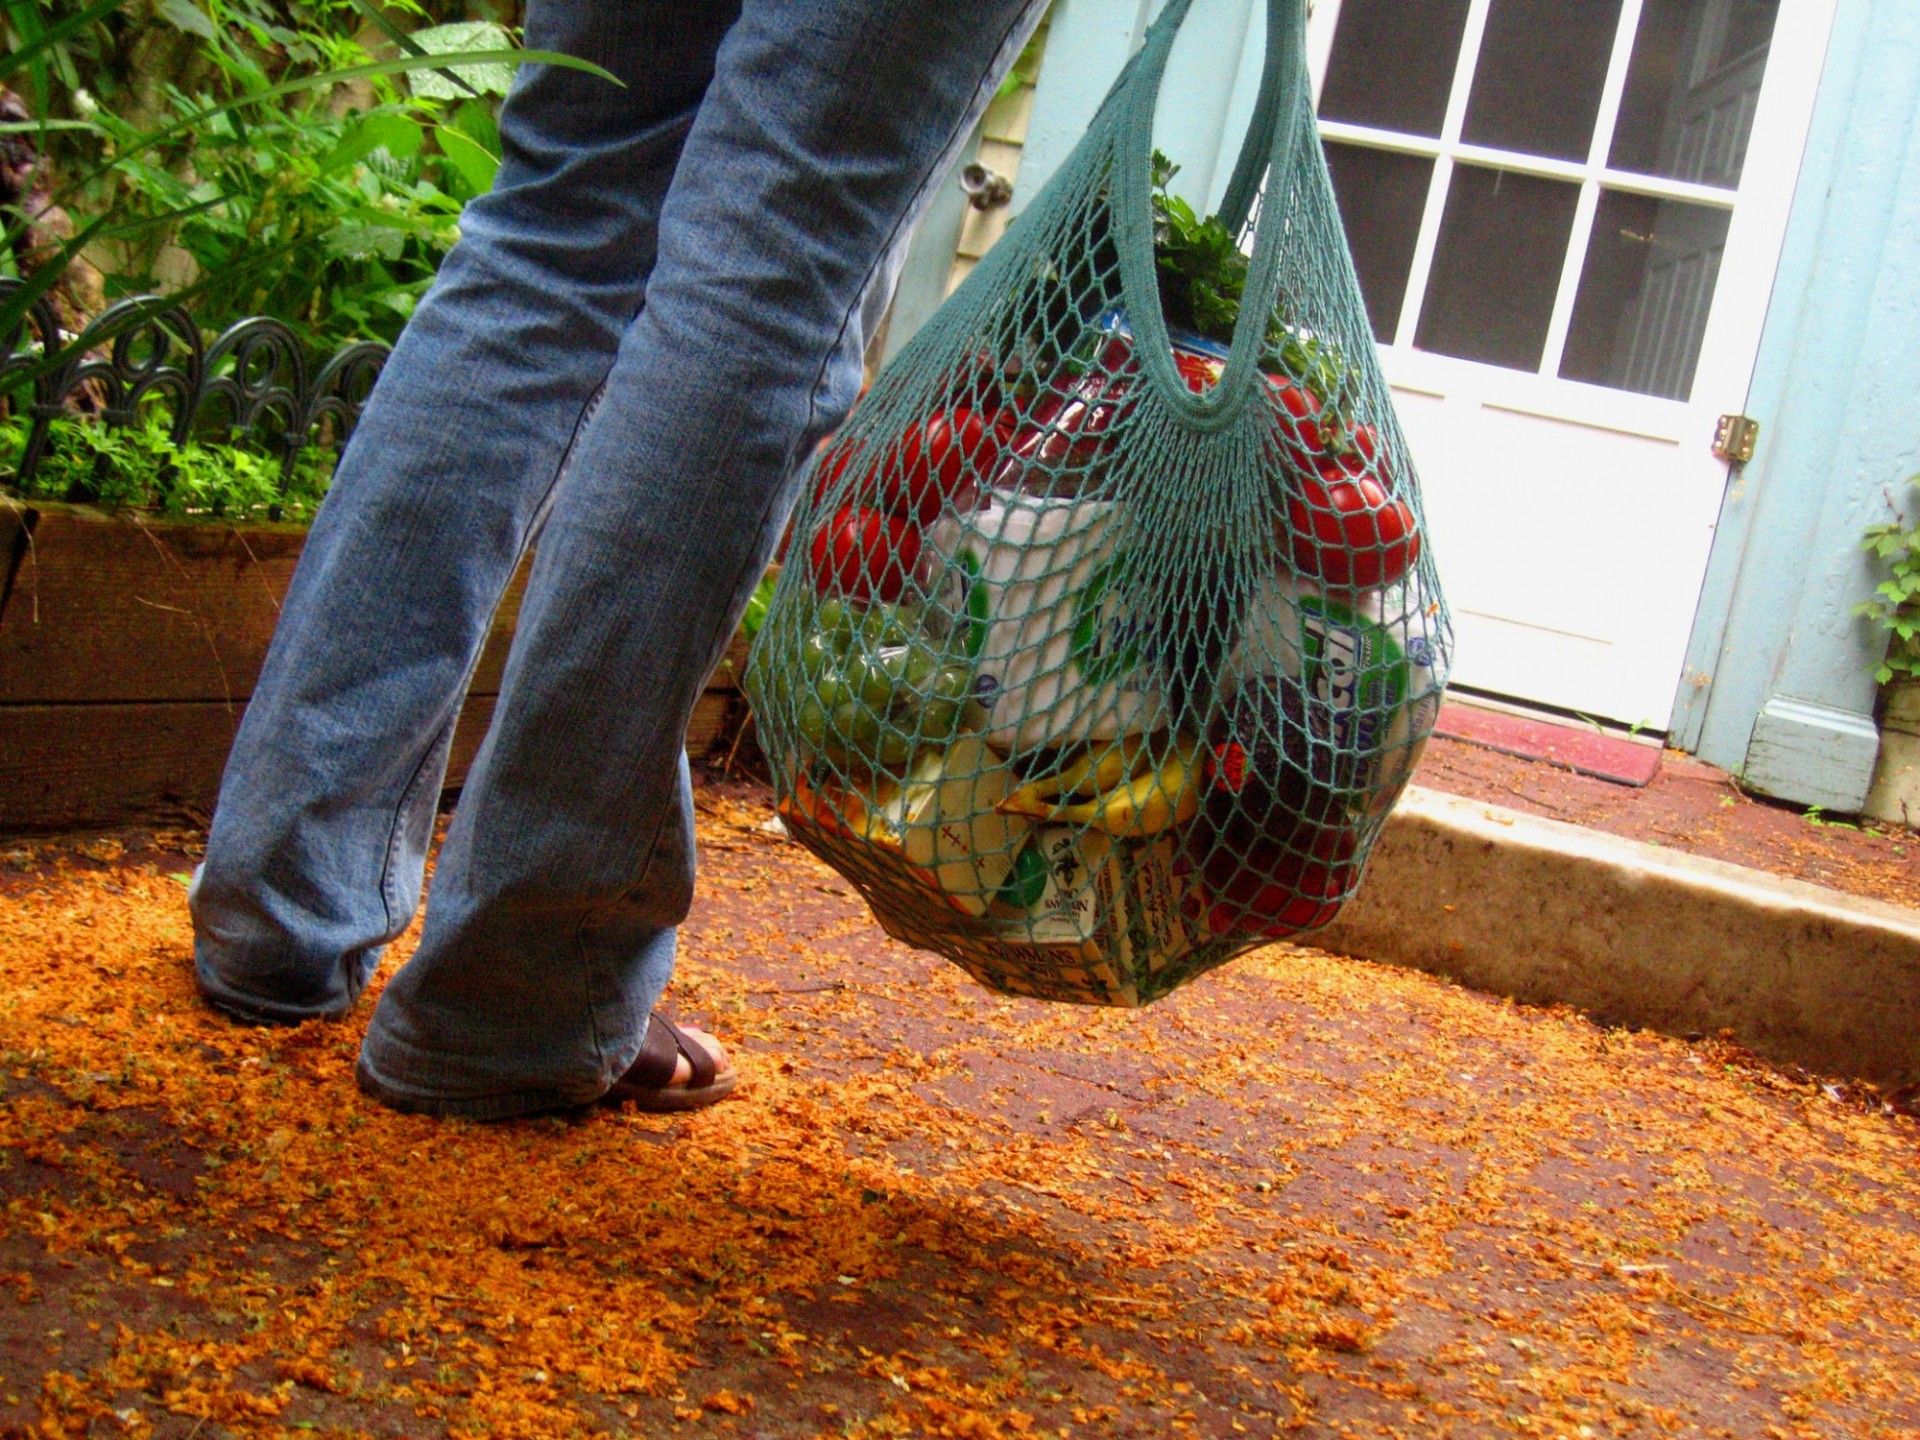 A person holds a reusable bag full of groceries